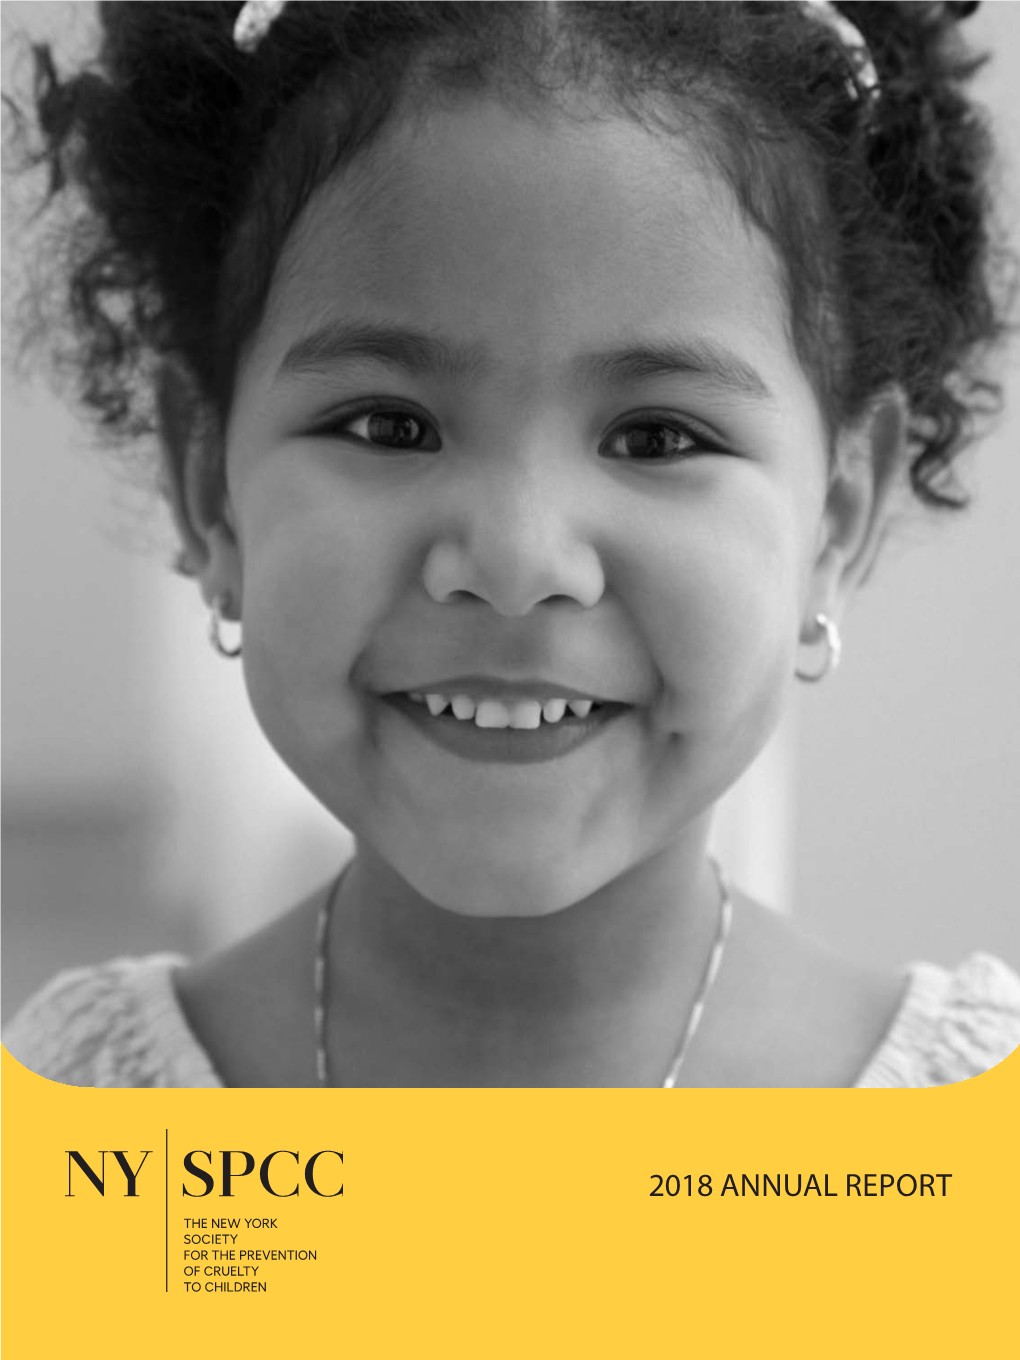 2018 ANNUAL REPORT Founded in 1875, the New York Society for the Prevention of Cruelty to Children (The NYSPCC) Was the First Child Protection Agency in the World